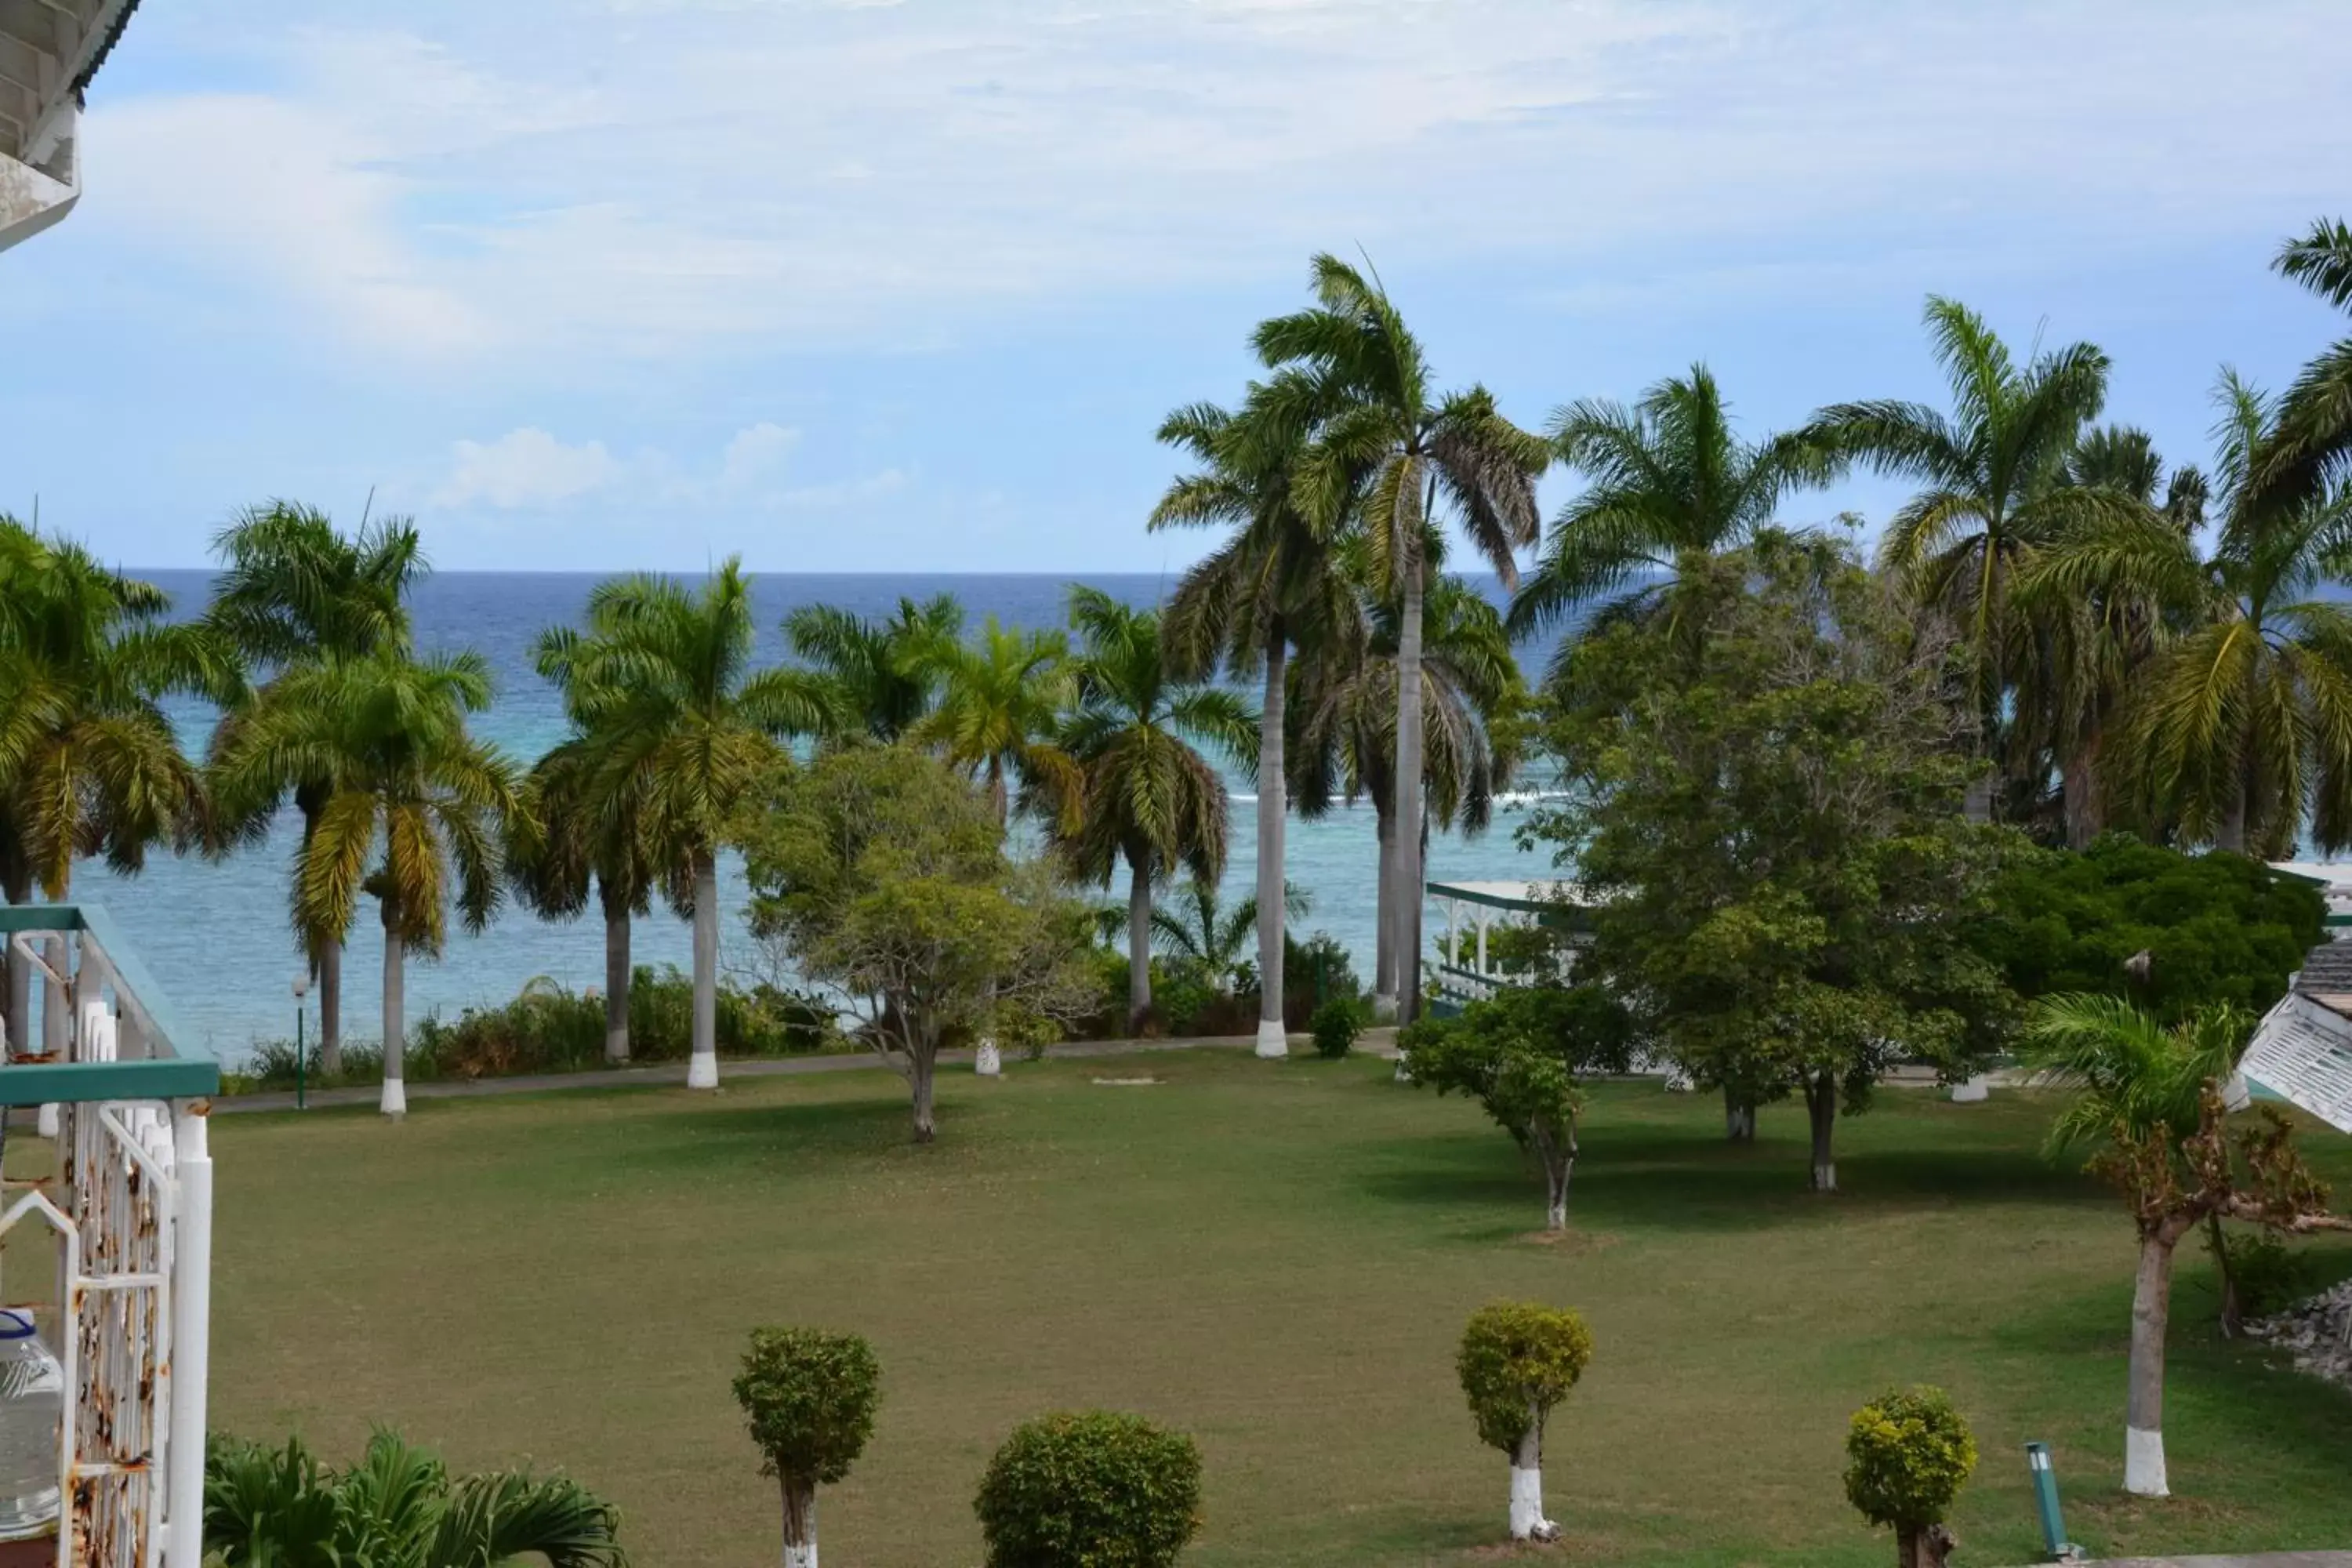 Garden view in Seacastles by the beach/pool